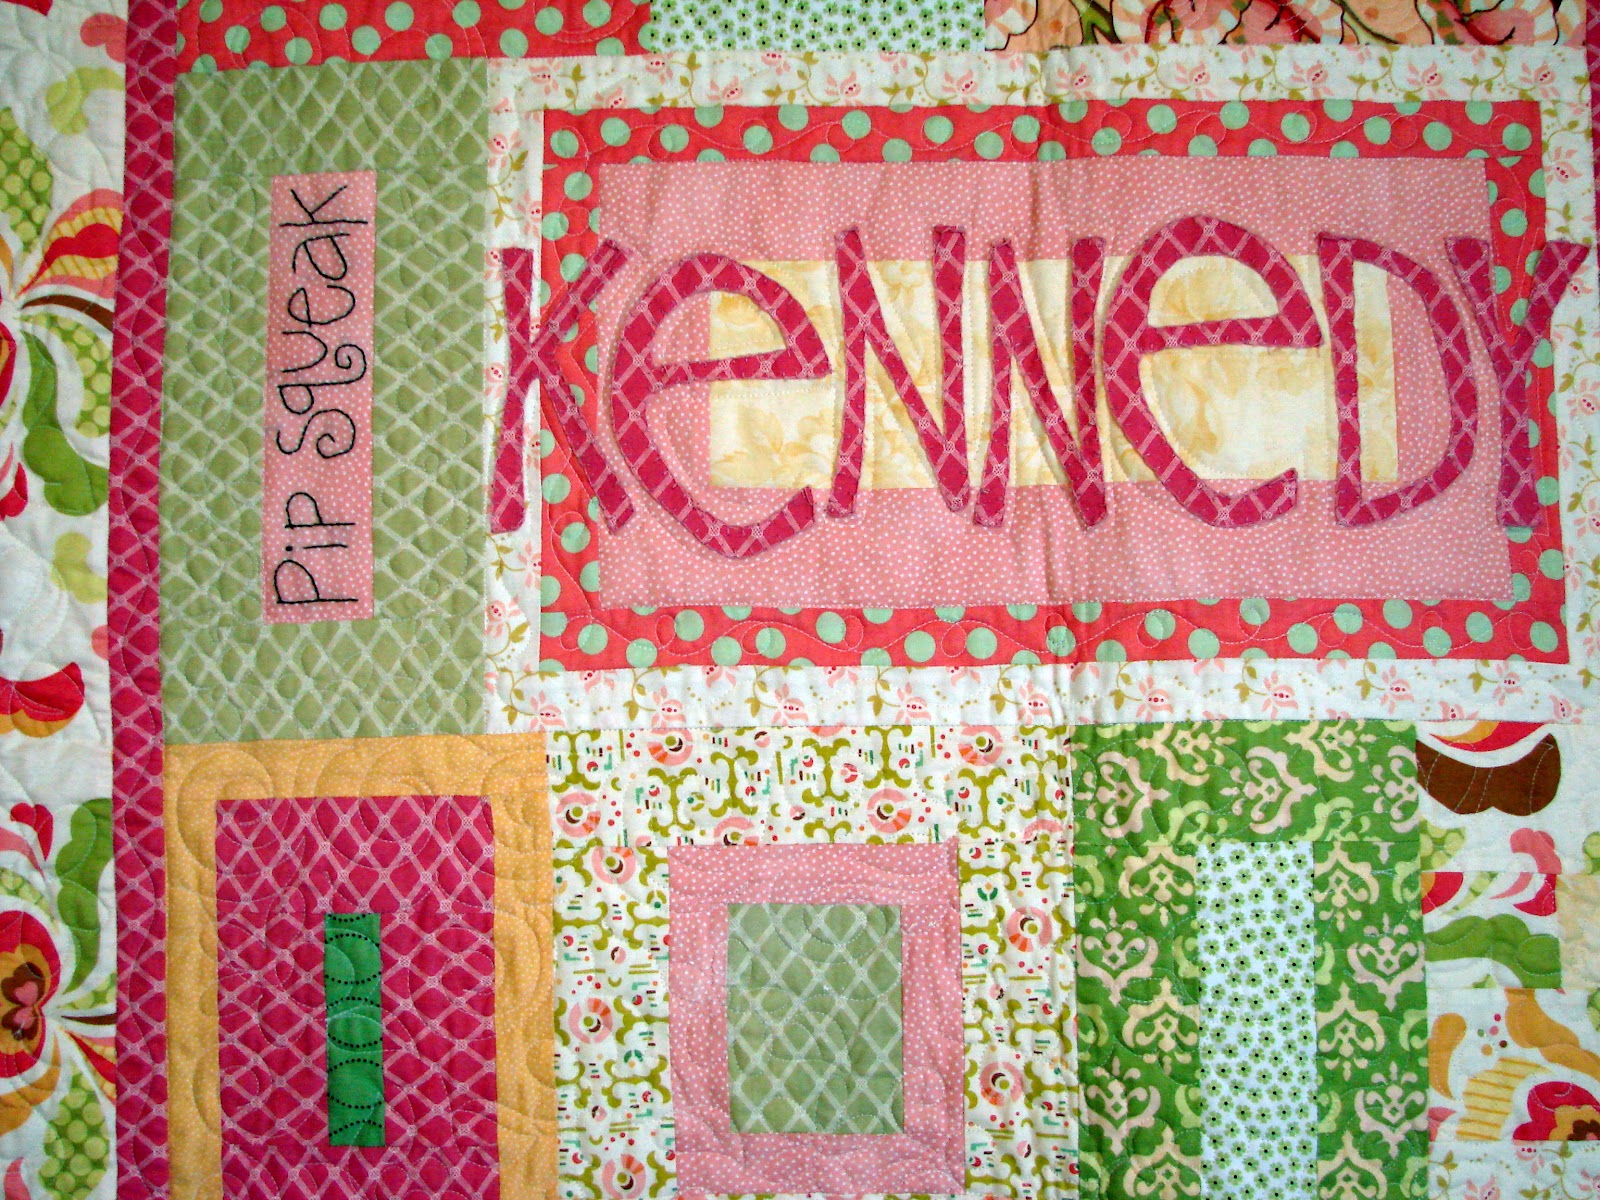 There A Lot Of Peek A Boo Embroidery On The Quilt